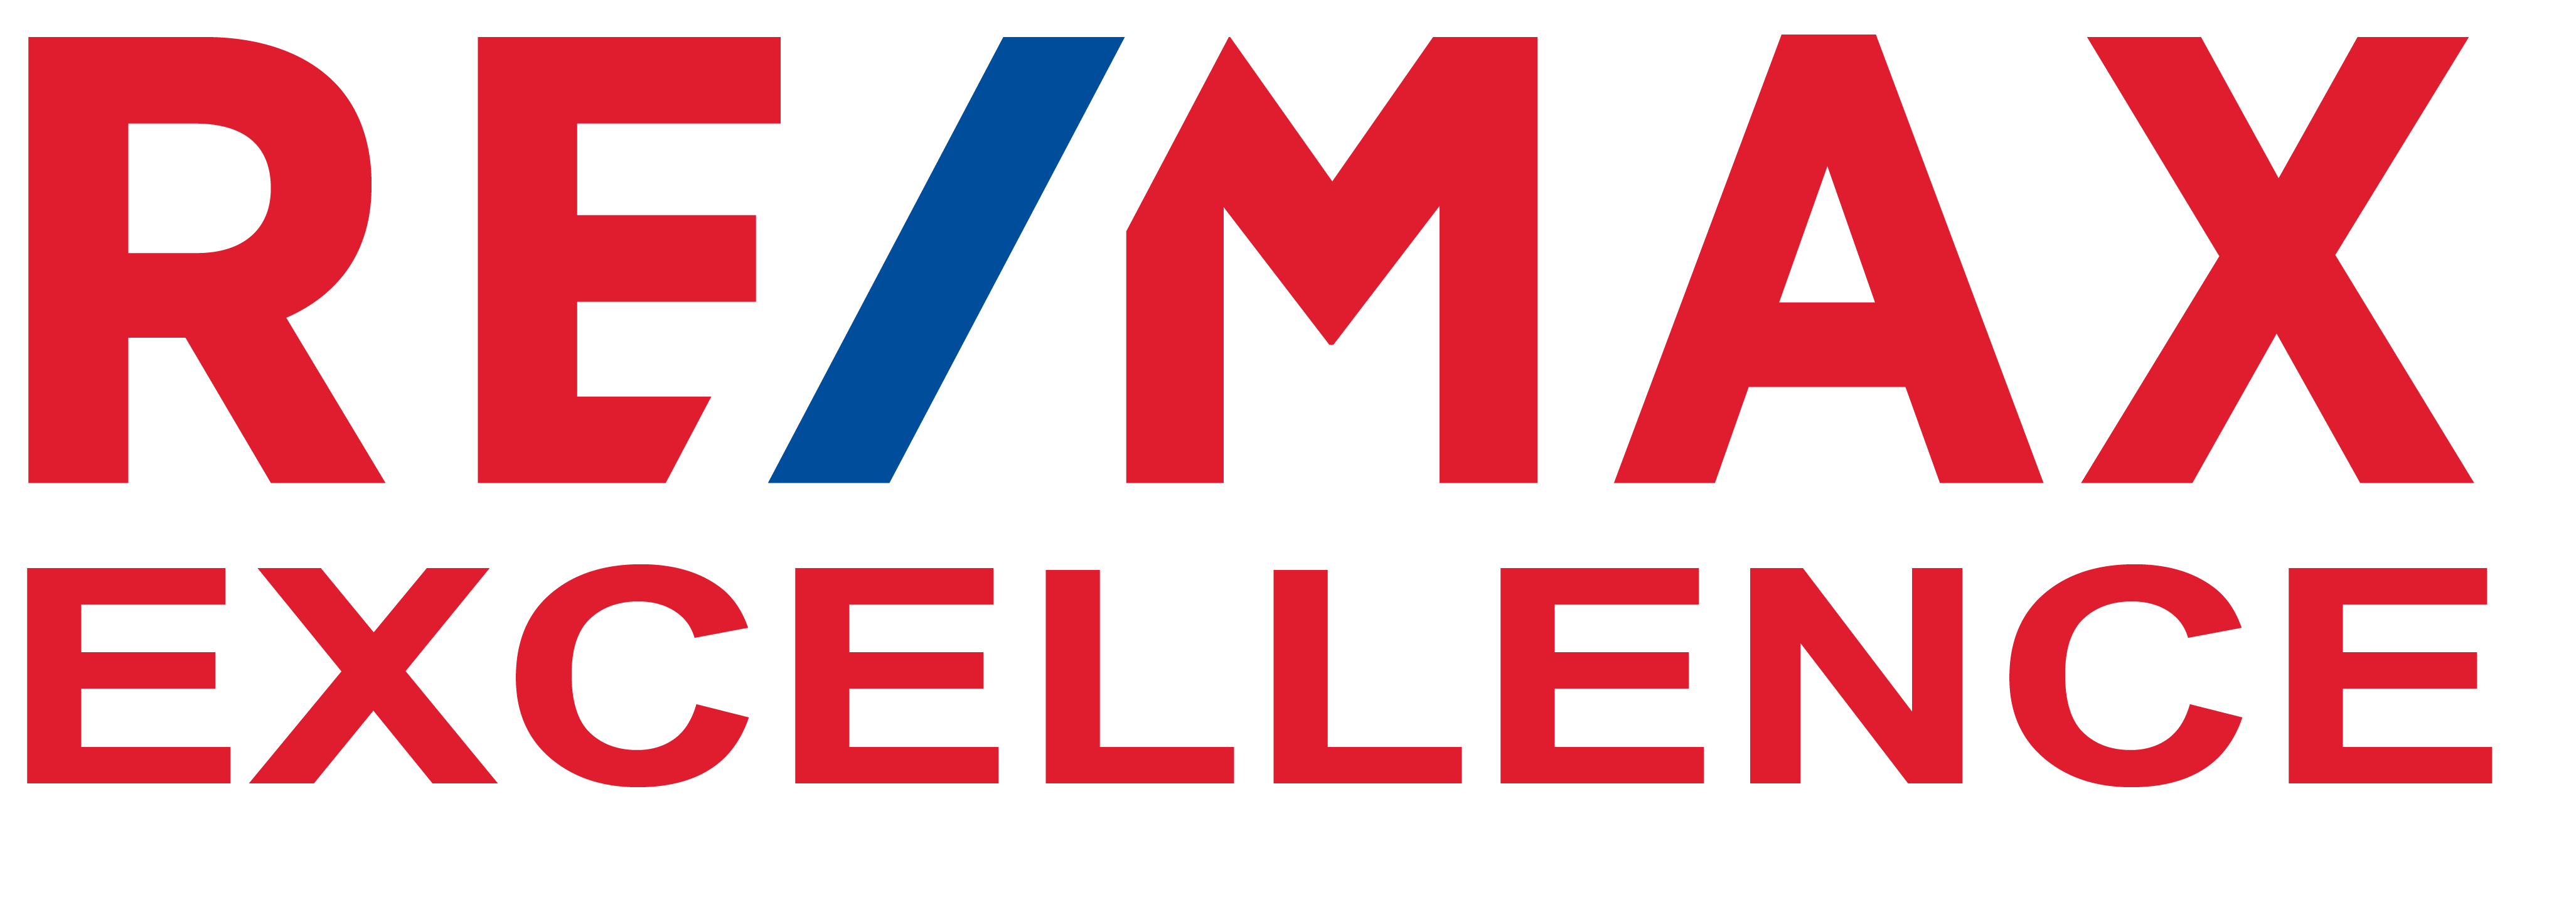 RE/MAX Excellence